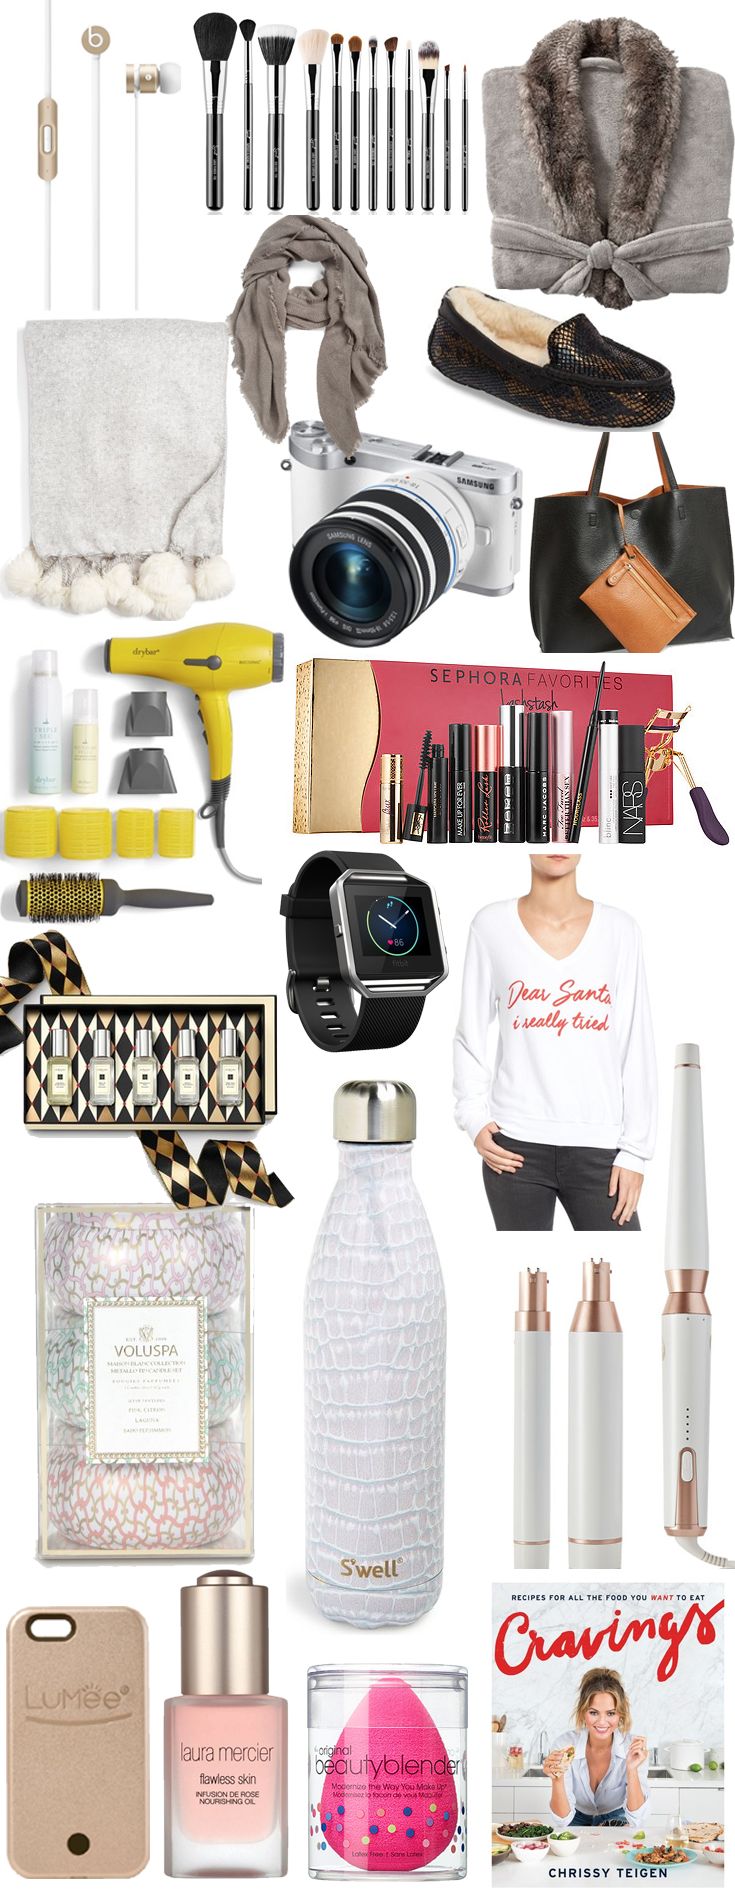 Land of Lou's Gift Guide for Her